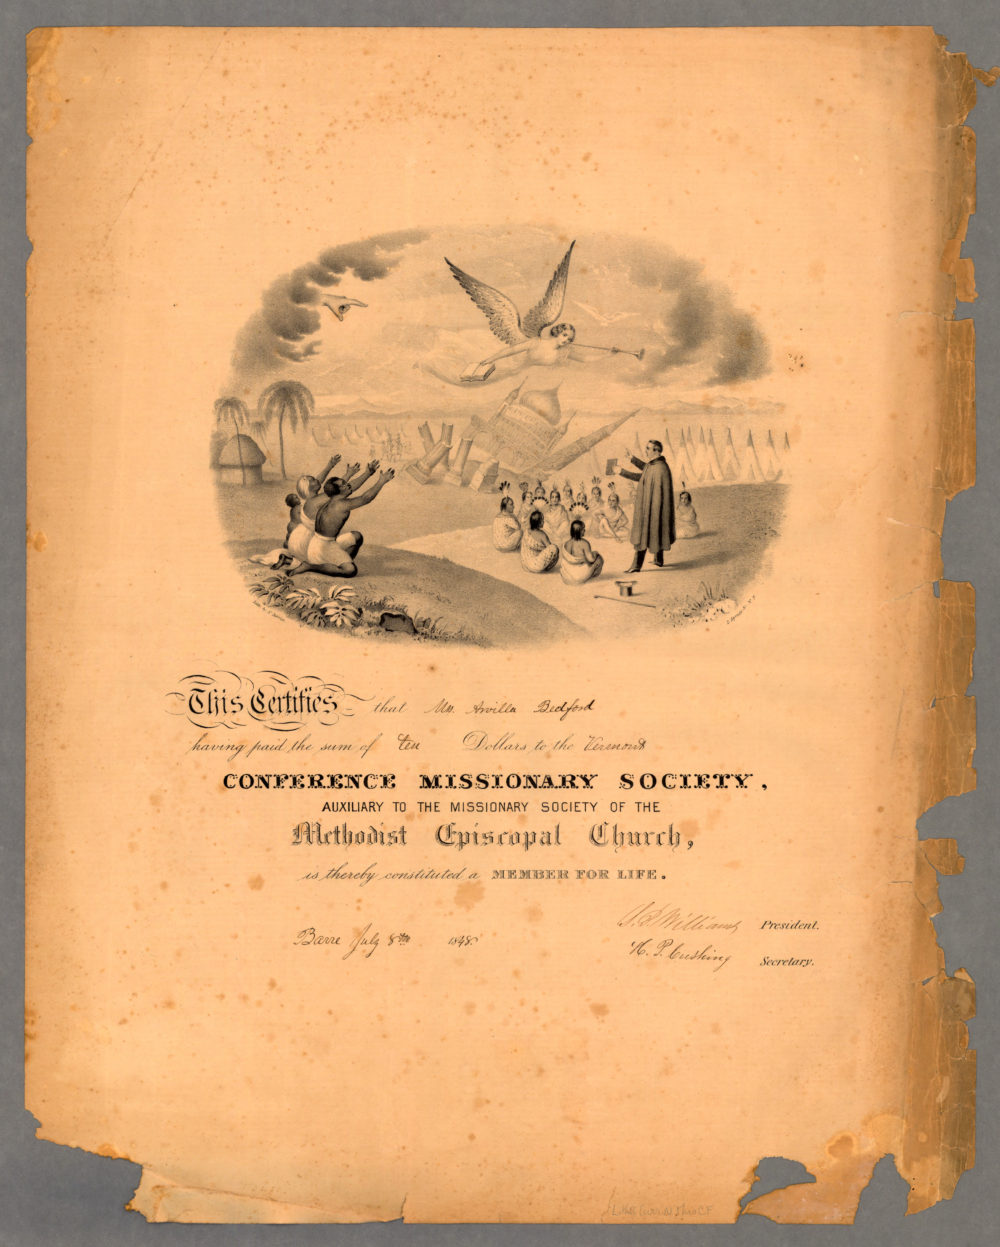 N. Currier, Membership Certificate to [Vermont] Conference Missionary Society, 1848, via American Antiquarian Society. 